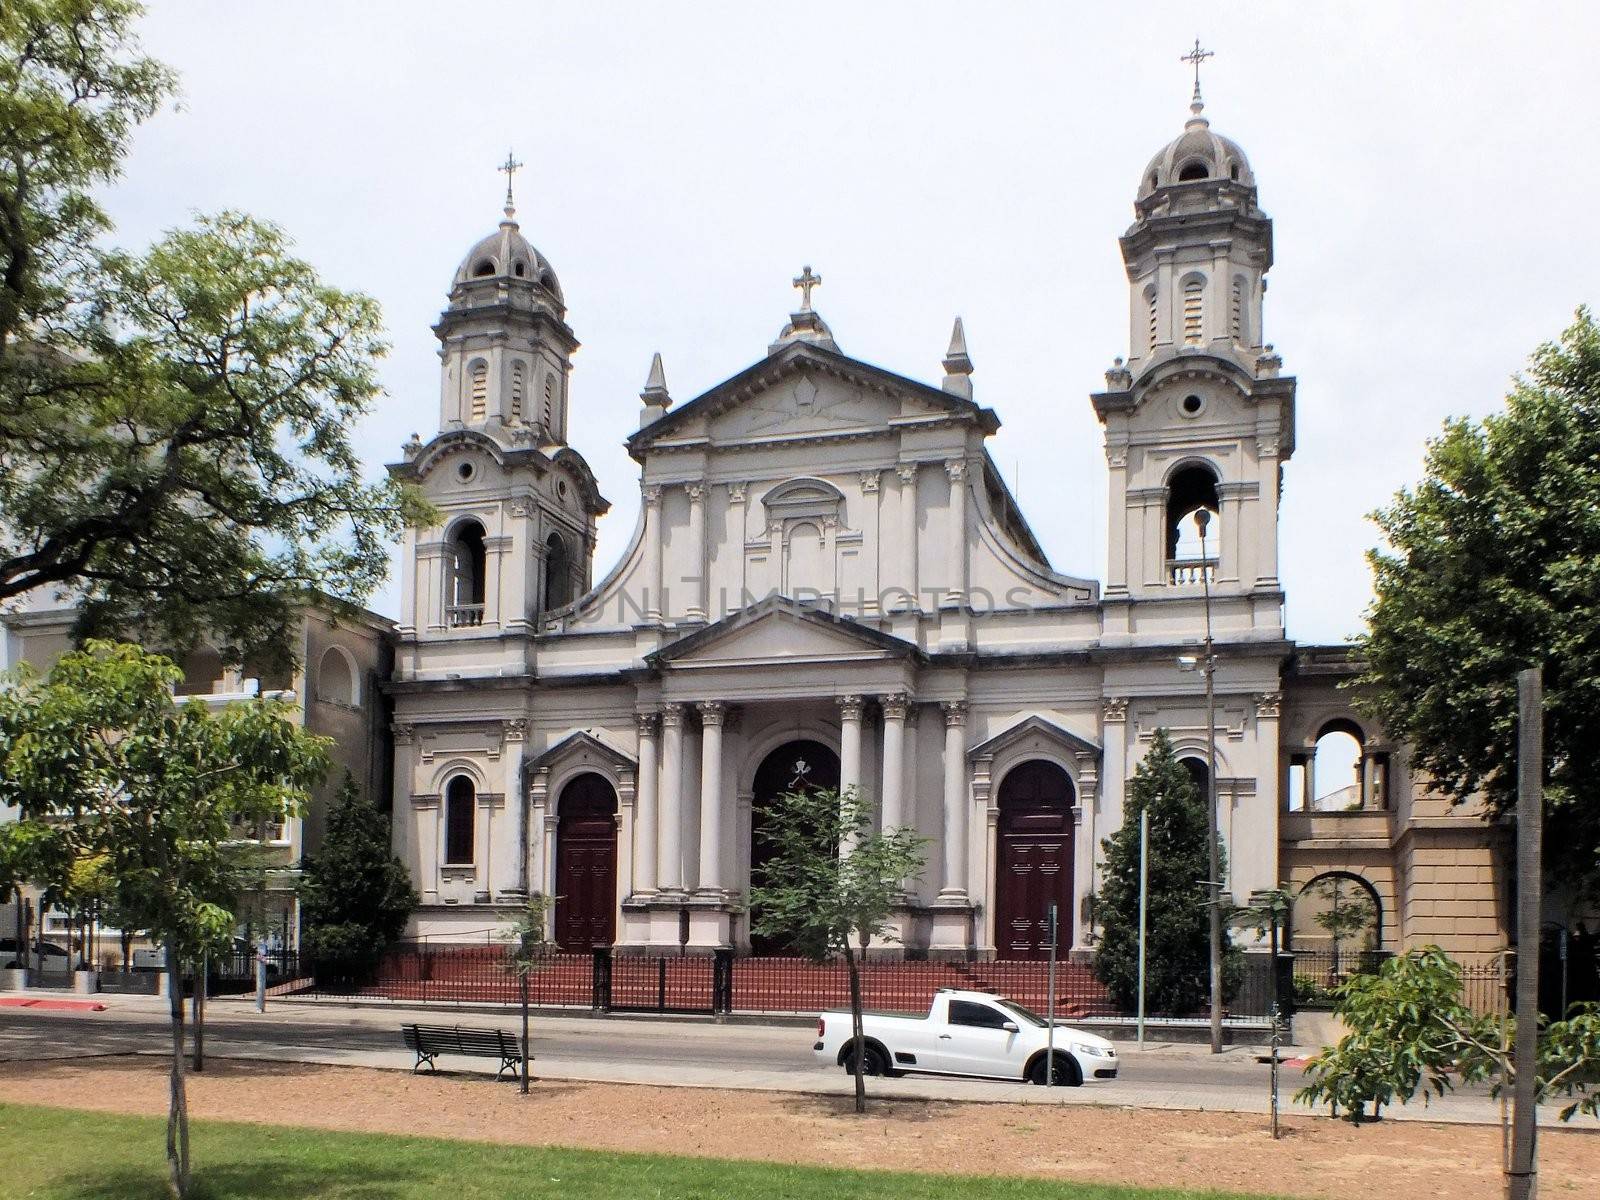 The Cathedral Basilica of Saint John the Baptist (Catedral Basilica de San Juan Bautista) was designed by the priest and architect Ernesto Vespignani in the Eclecticism style, with a predominantly Baroque facade. It was consecrated in 1889, dedicated to Saint John the Baptist.